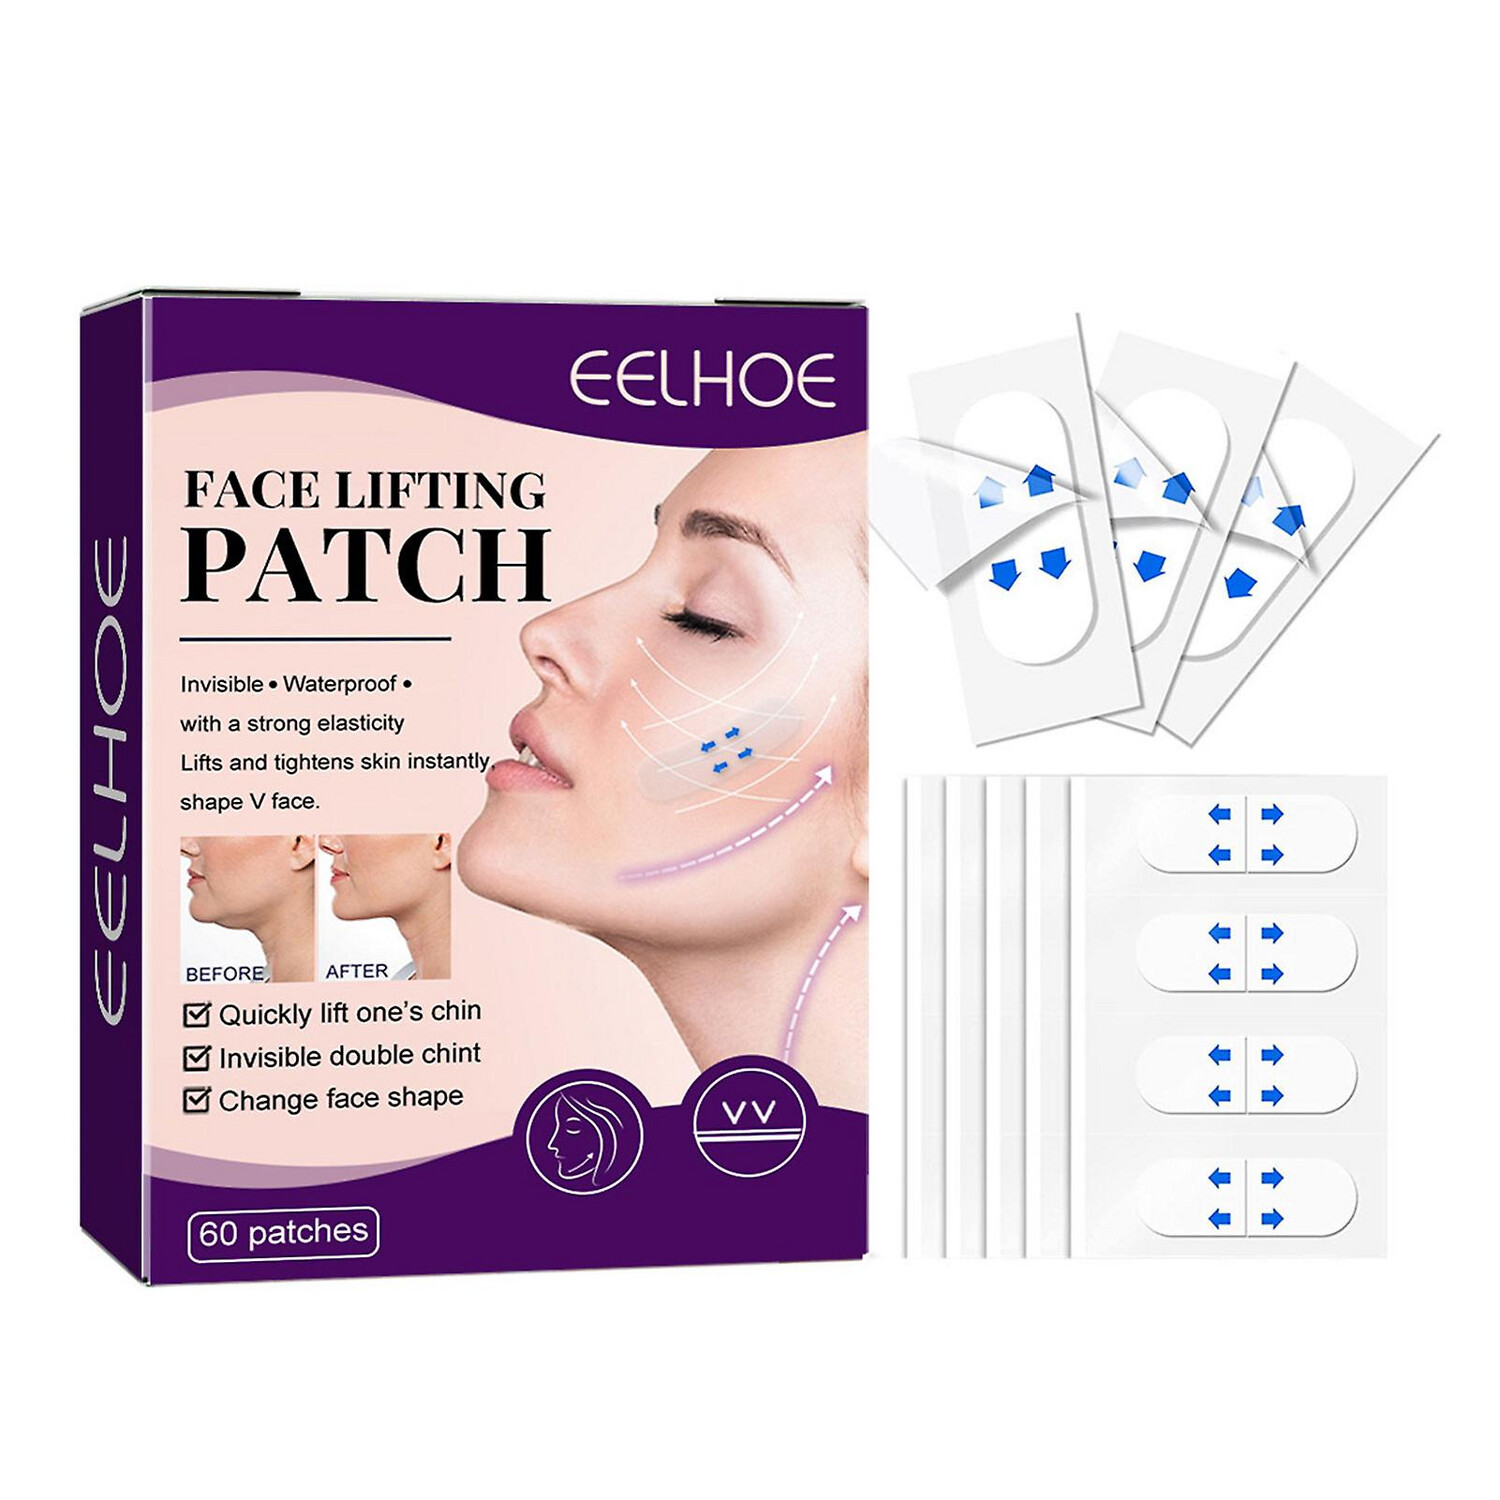 Face Lifting Patches